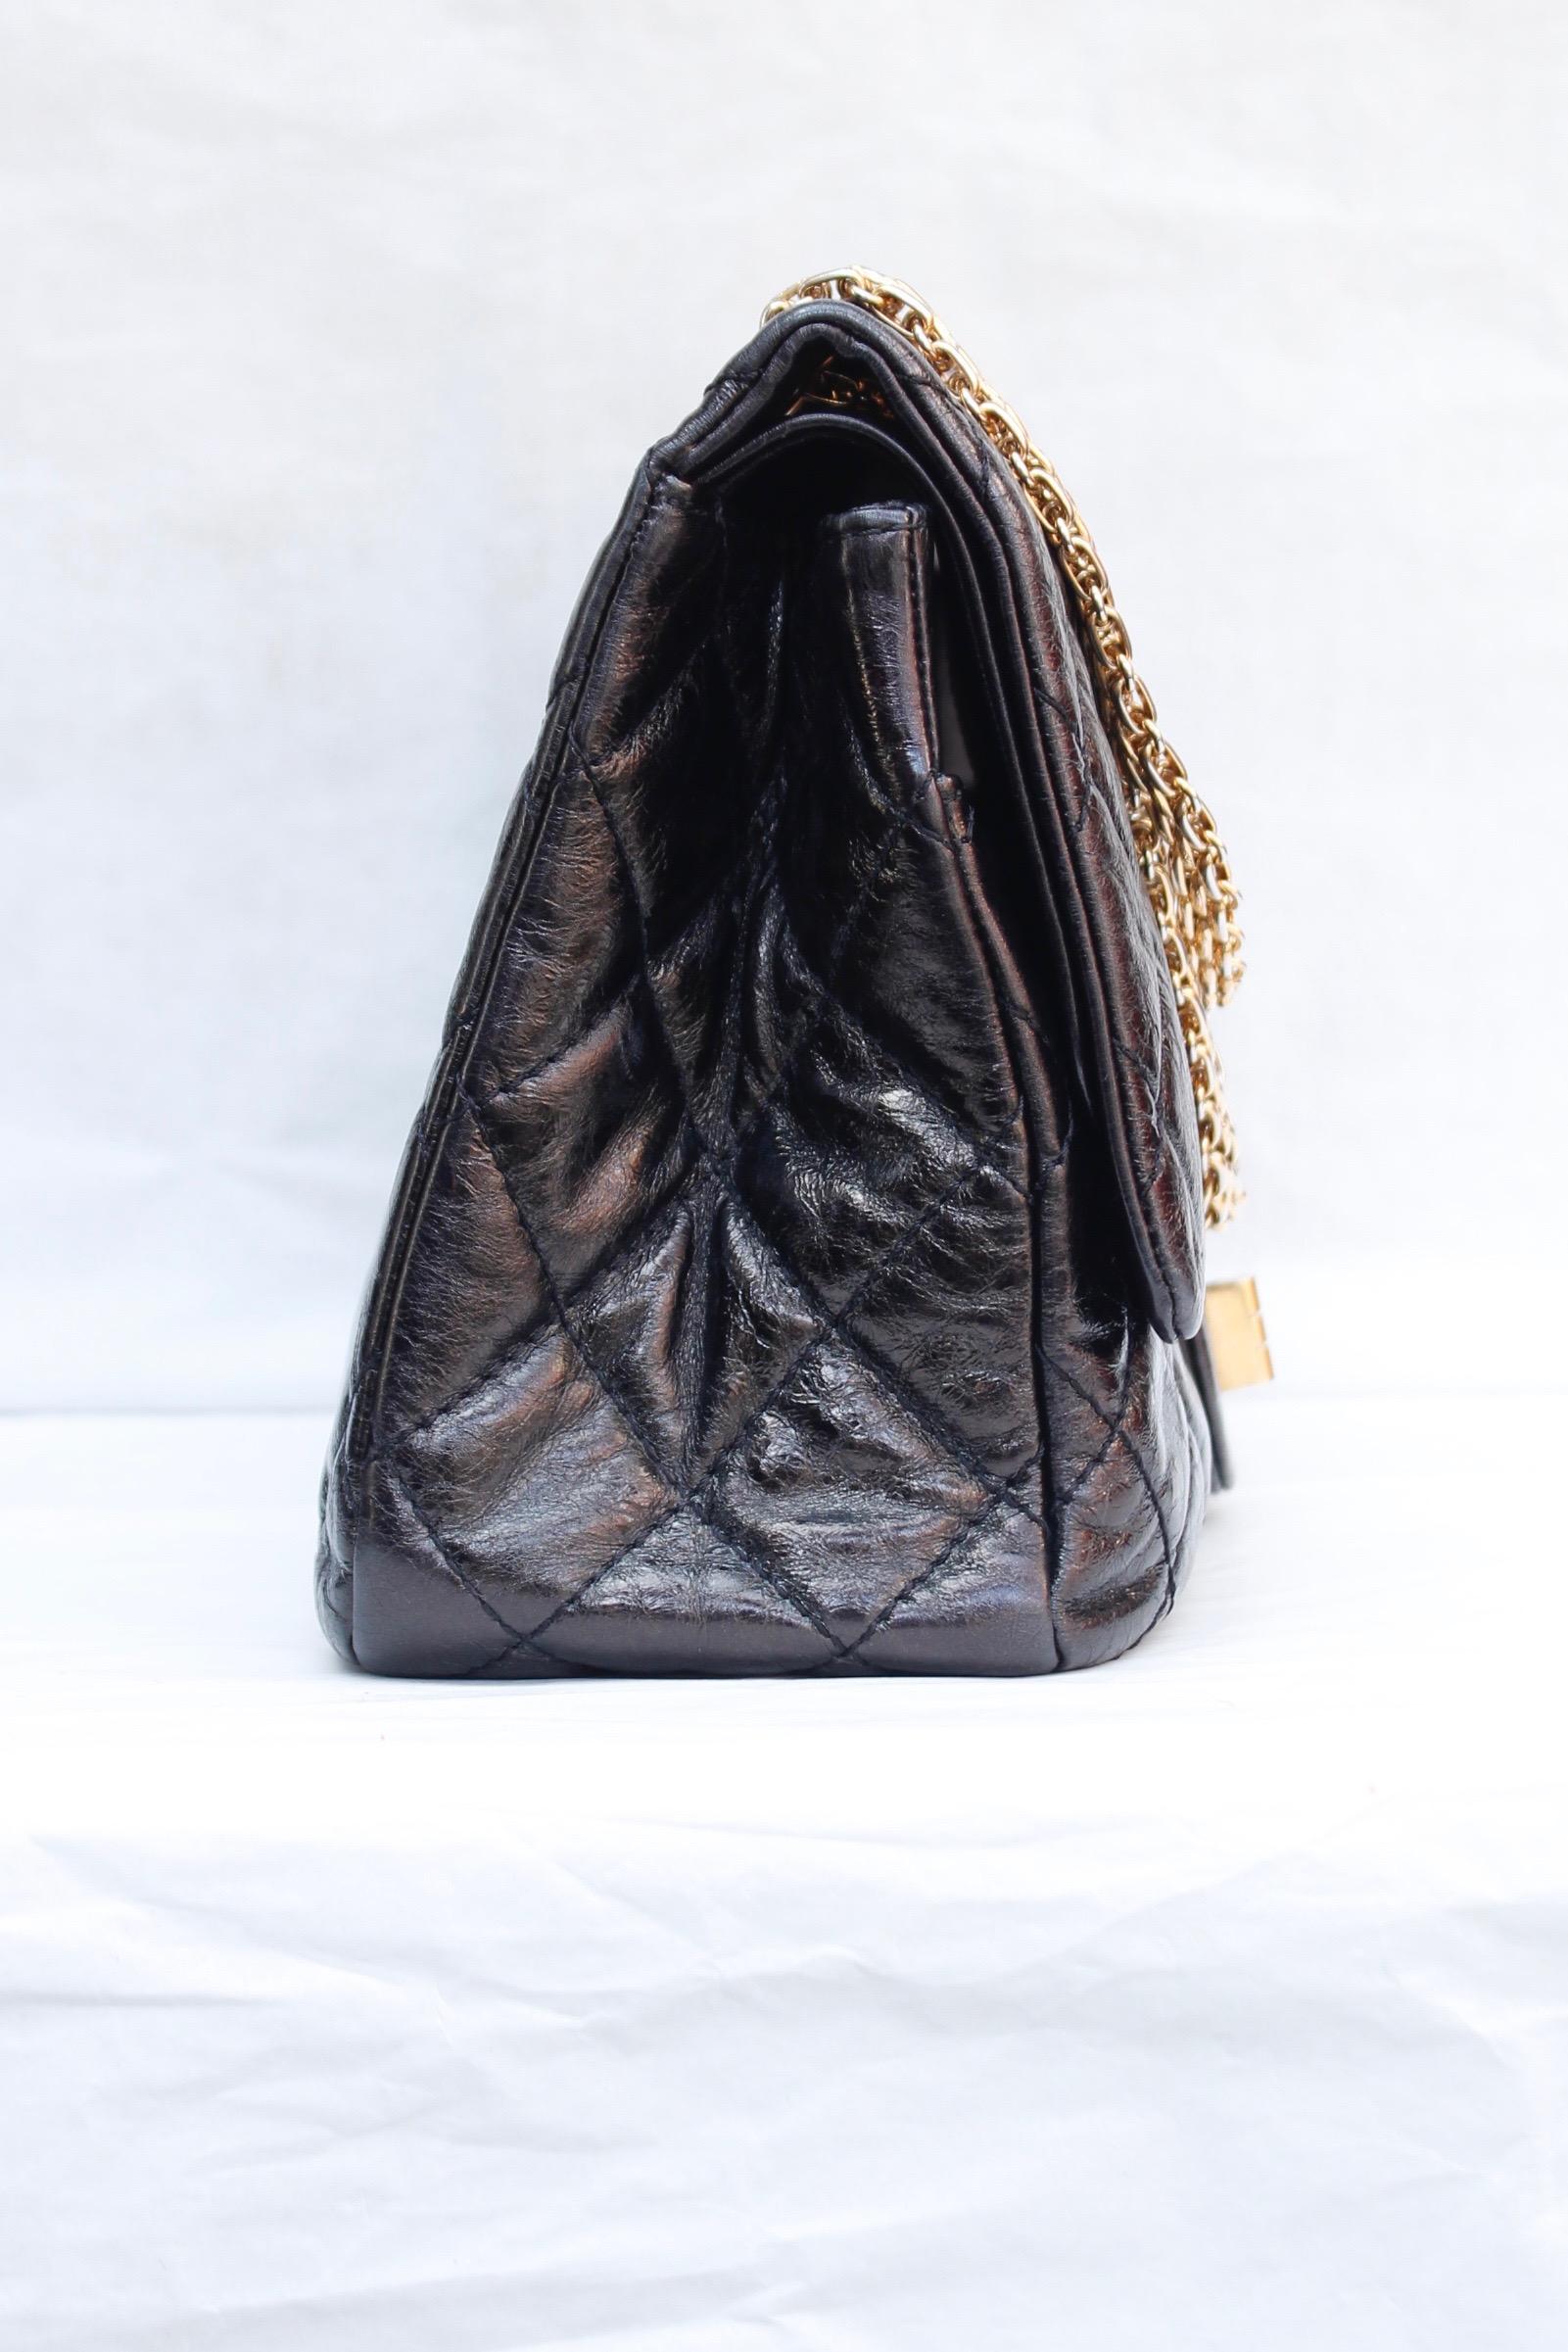 Women's Chanel iconic cracked patent leather 2.55 bag, 2006/2008 For Sale